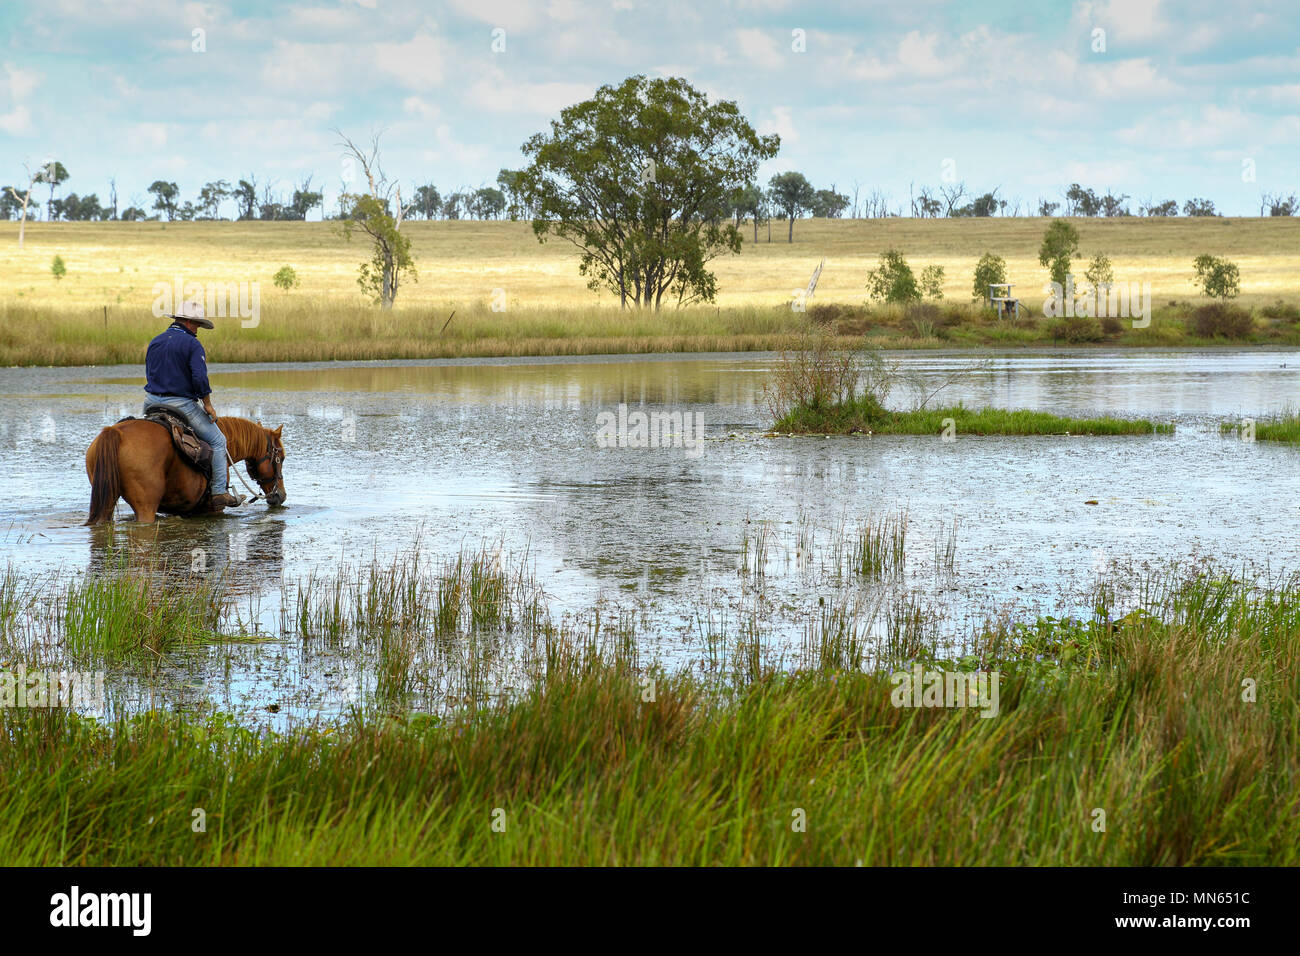 A man on his horse in a farm lake or dam. Stock Photo